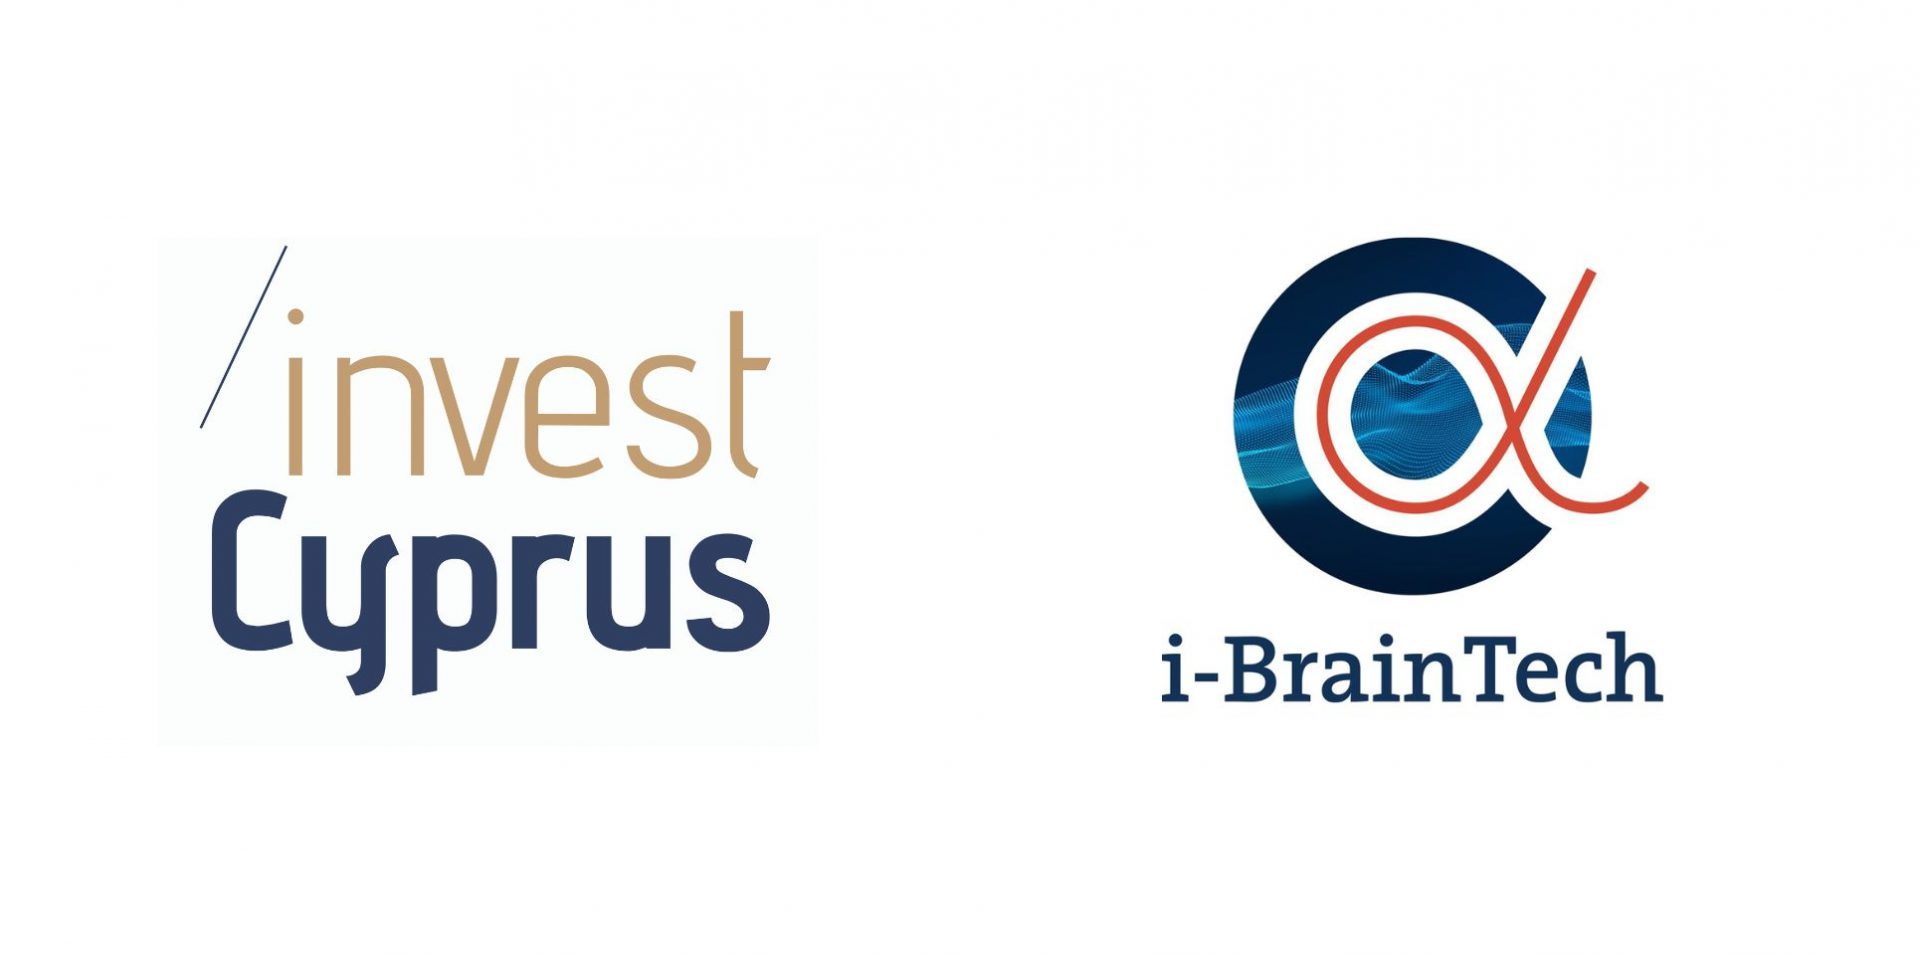 Invest Cyprus and i-BrainTech logos